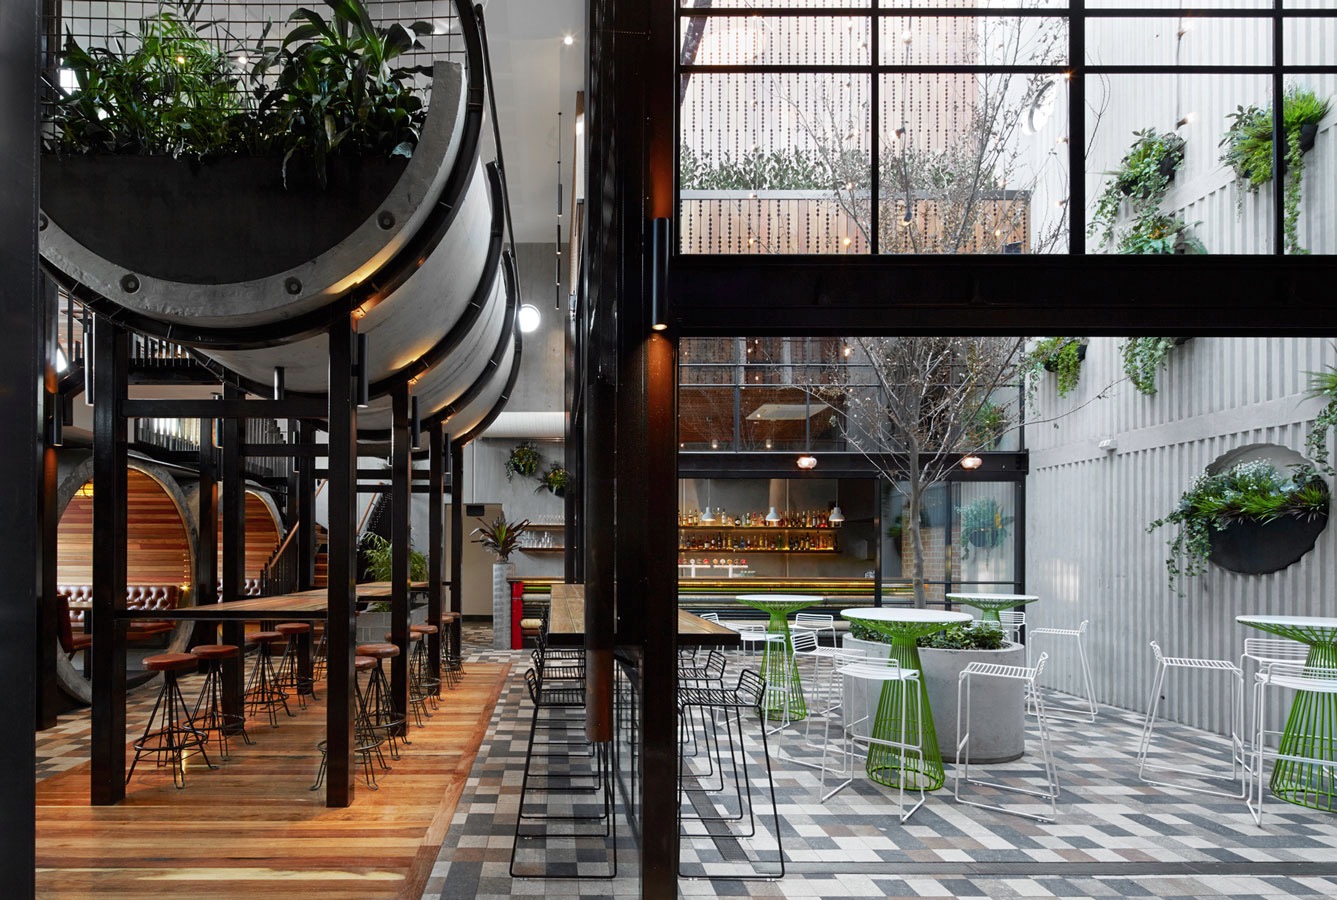 Prahran Hotel interiors by Techné Architects. More #concrete on the blog.